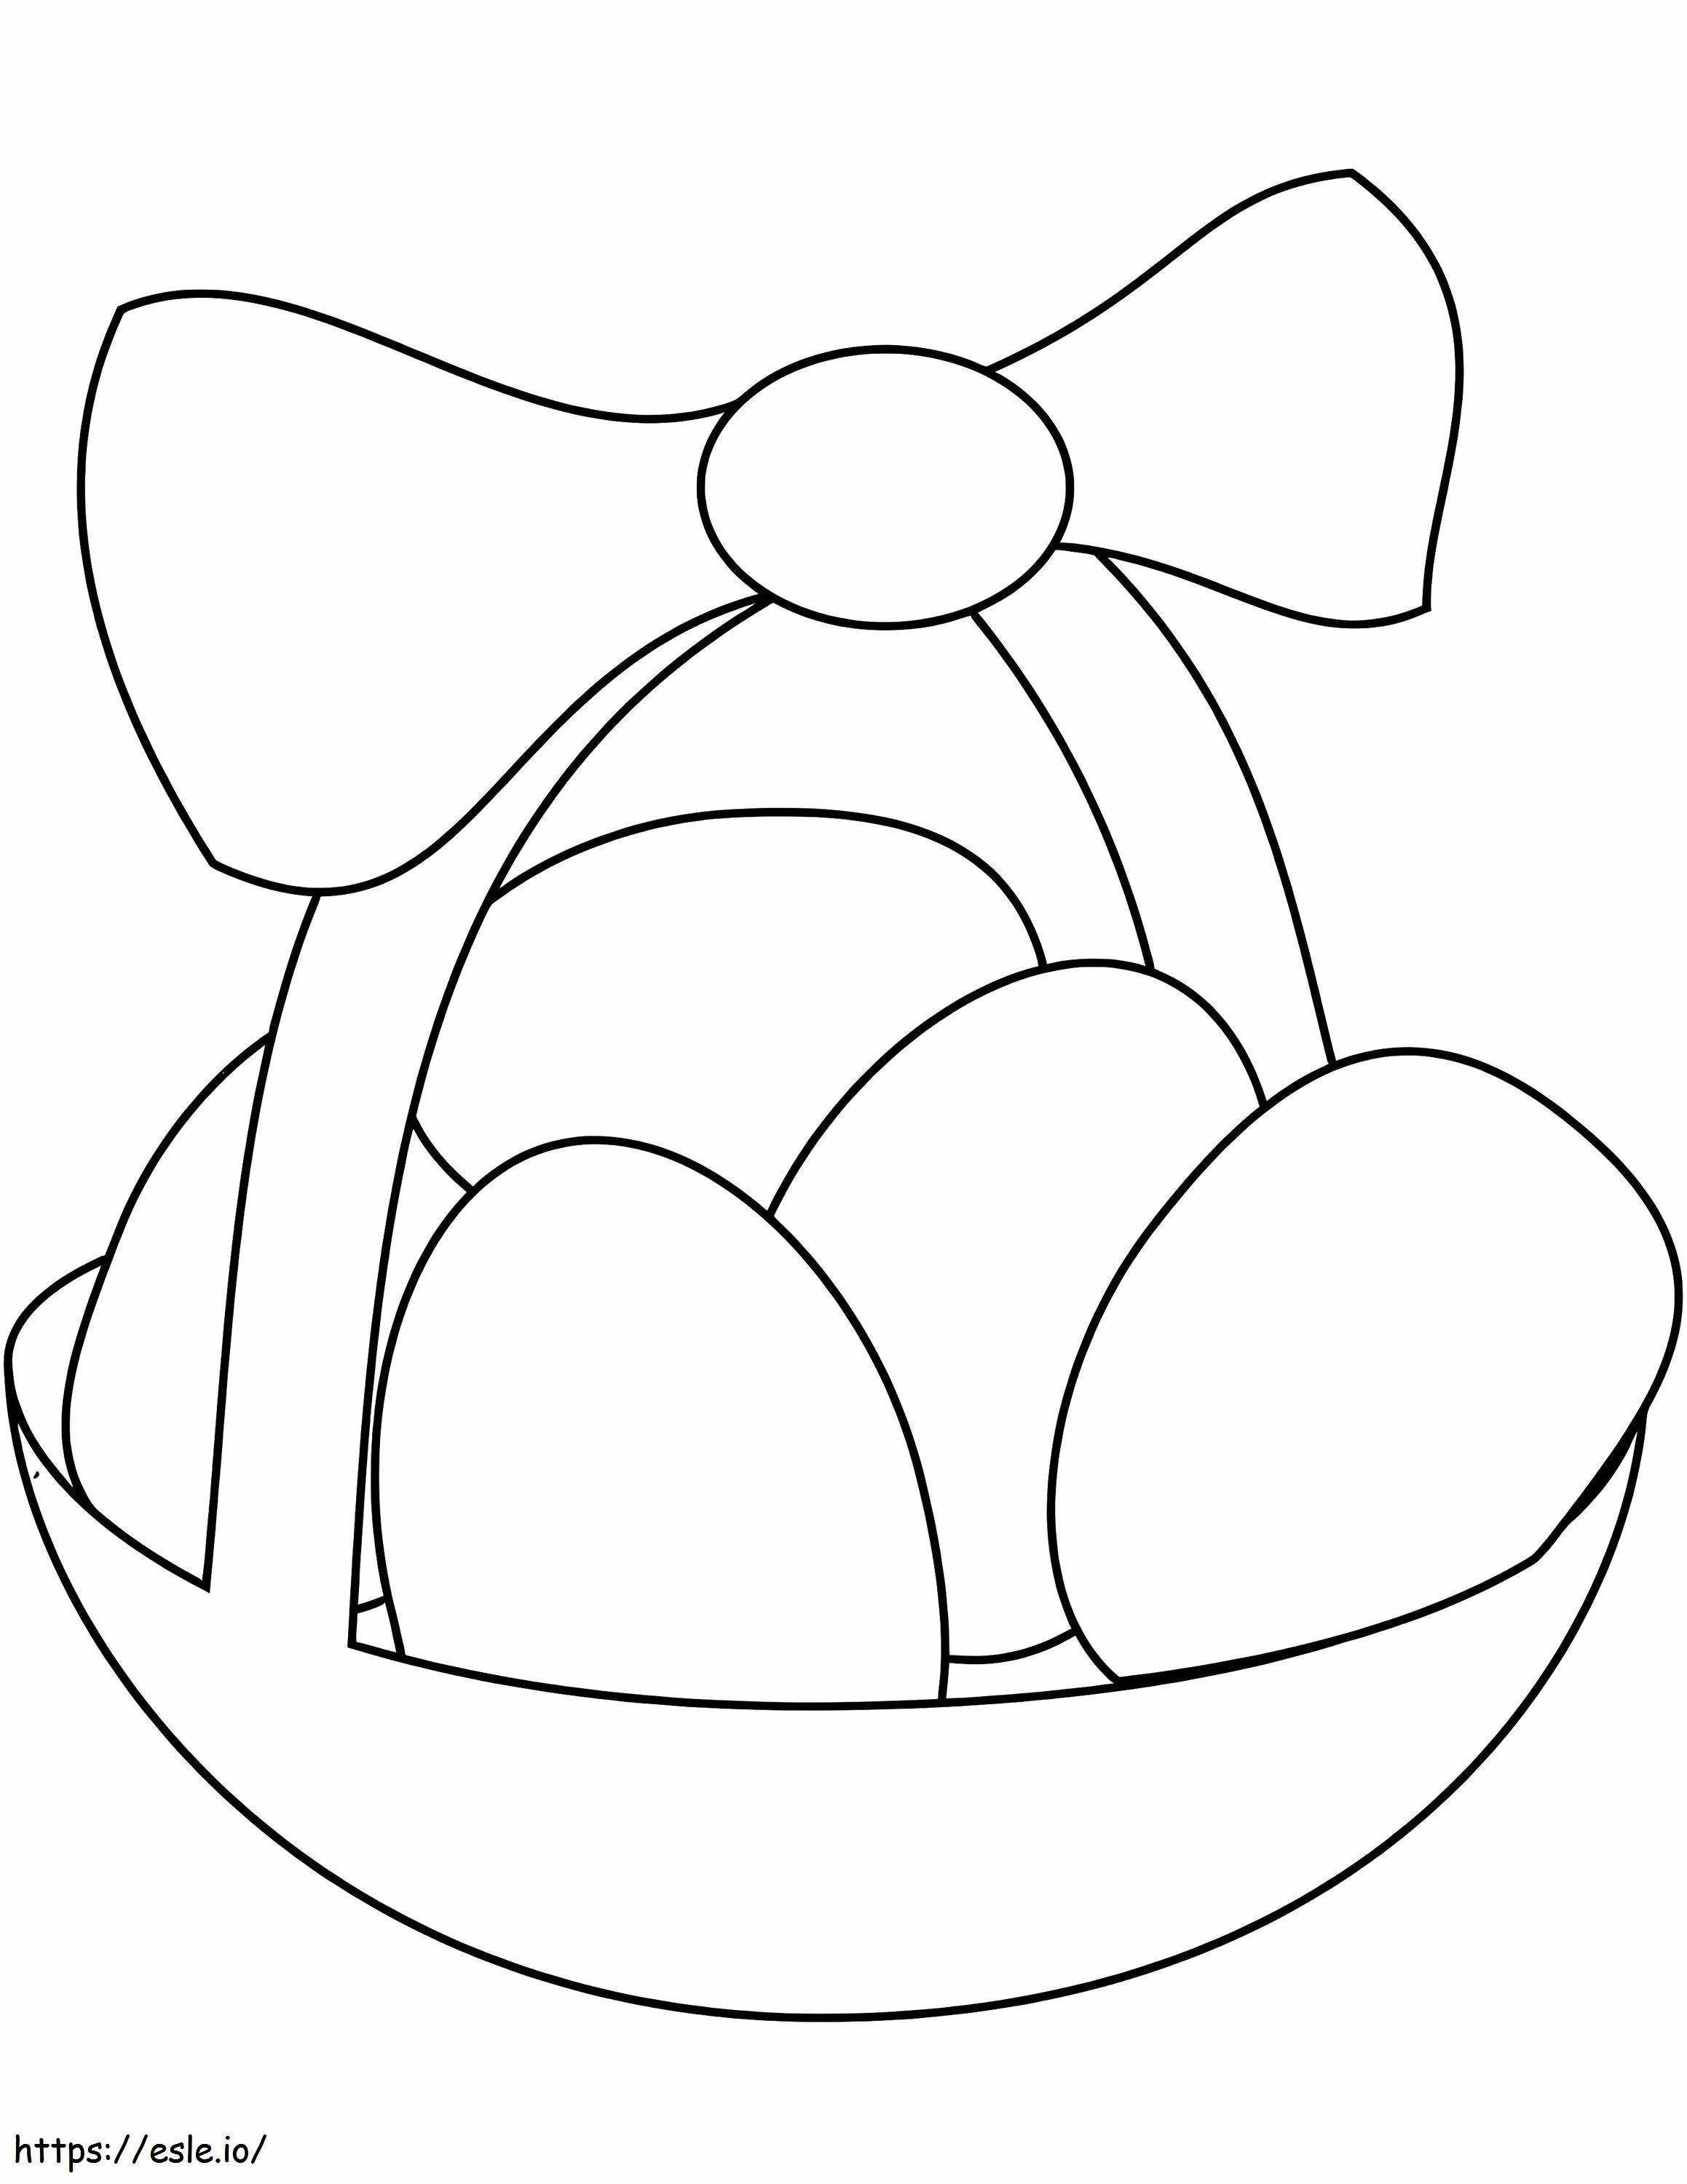 Simple Easter Basket 1 coloring page